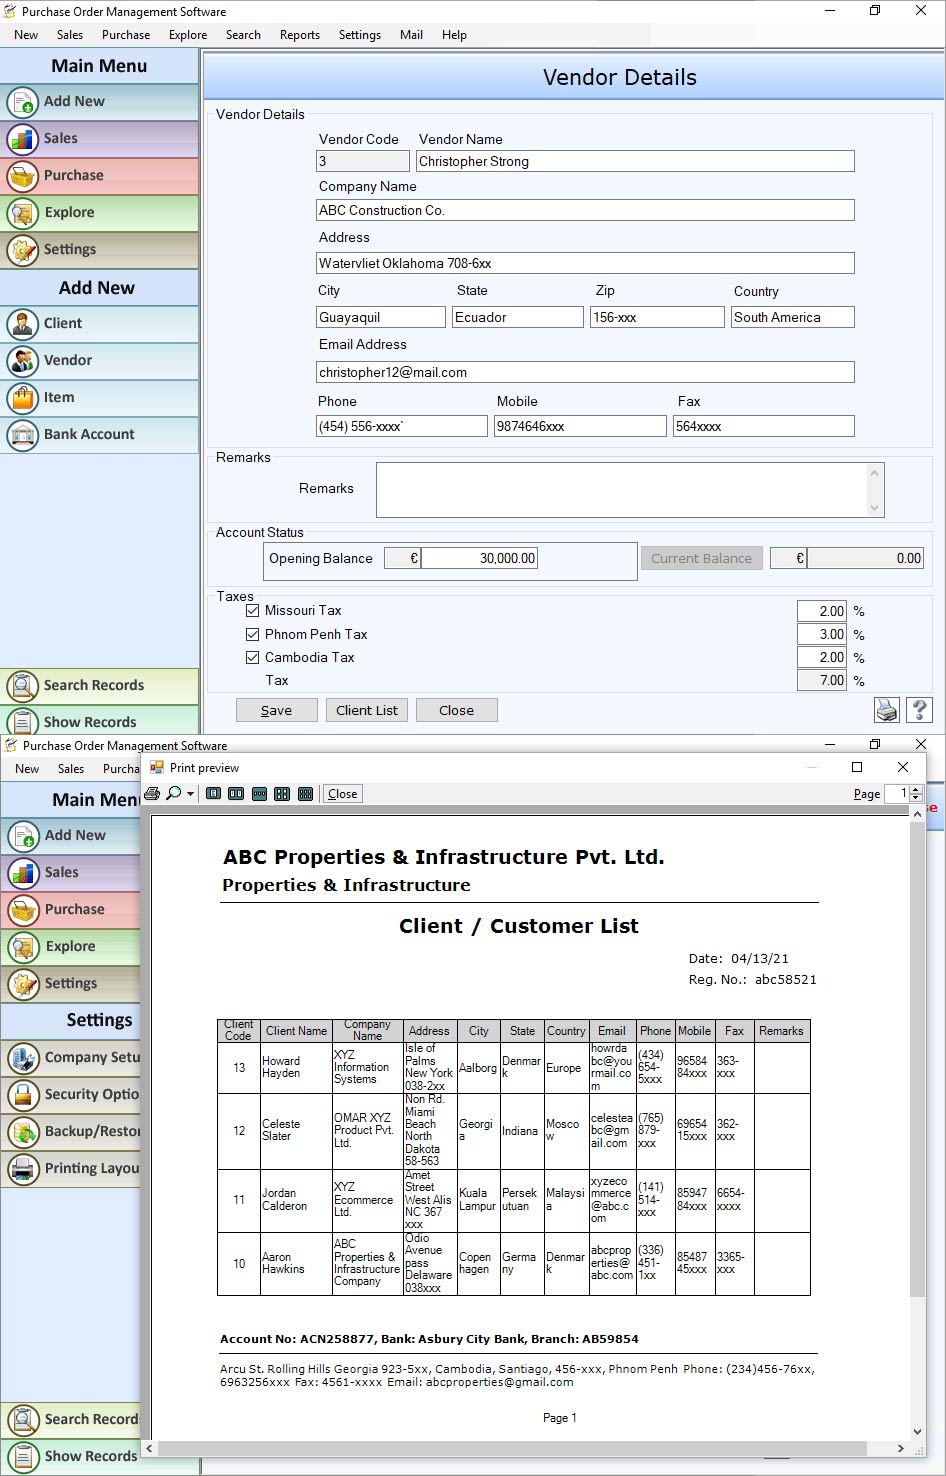 PO management tool easily generates and process purchase or sales order details